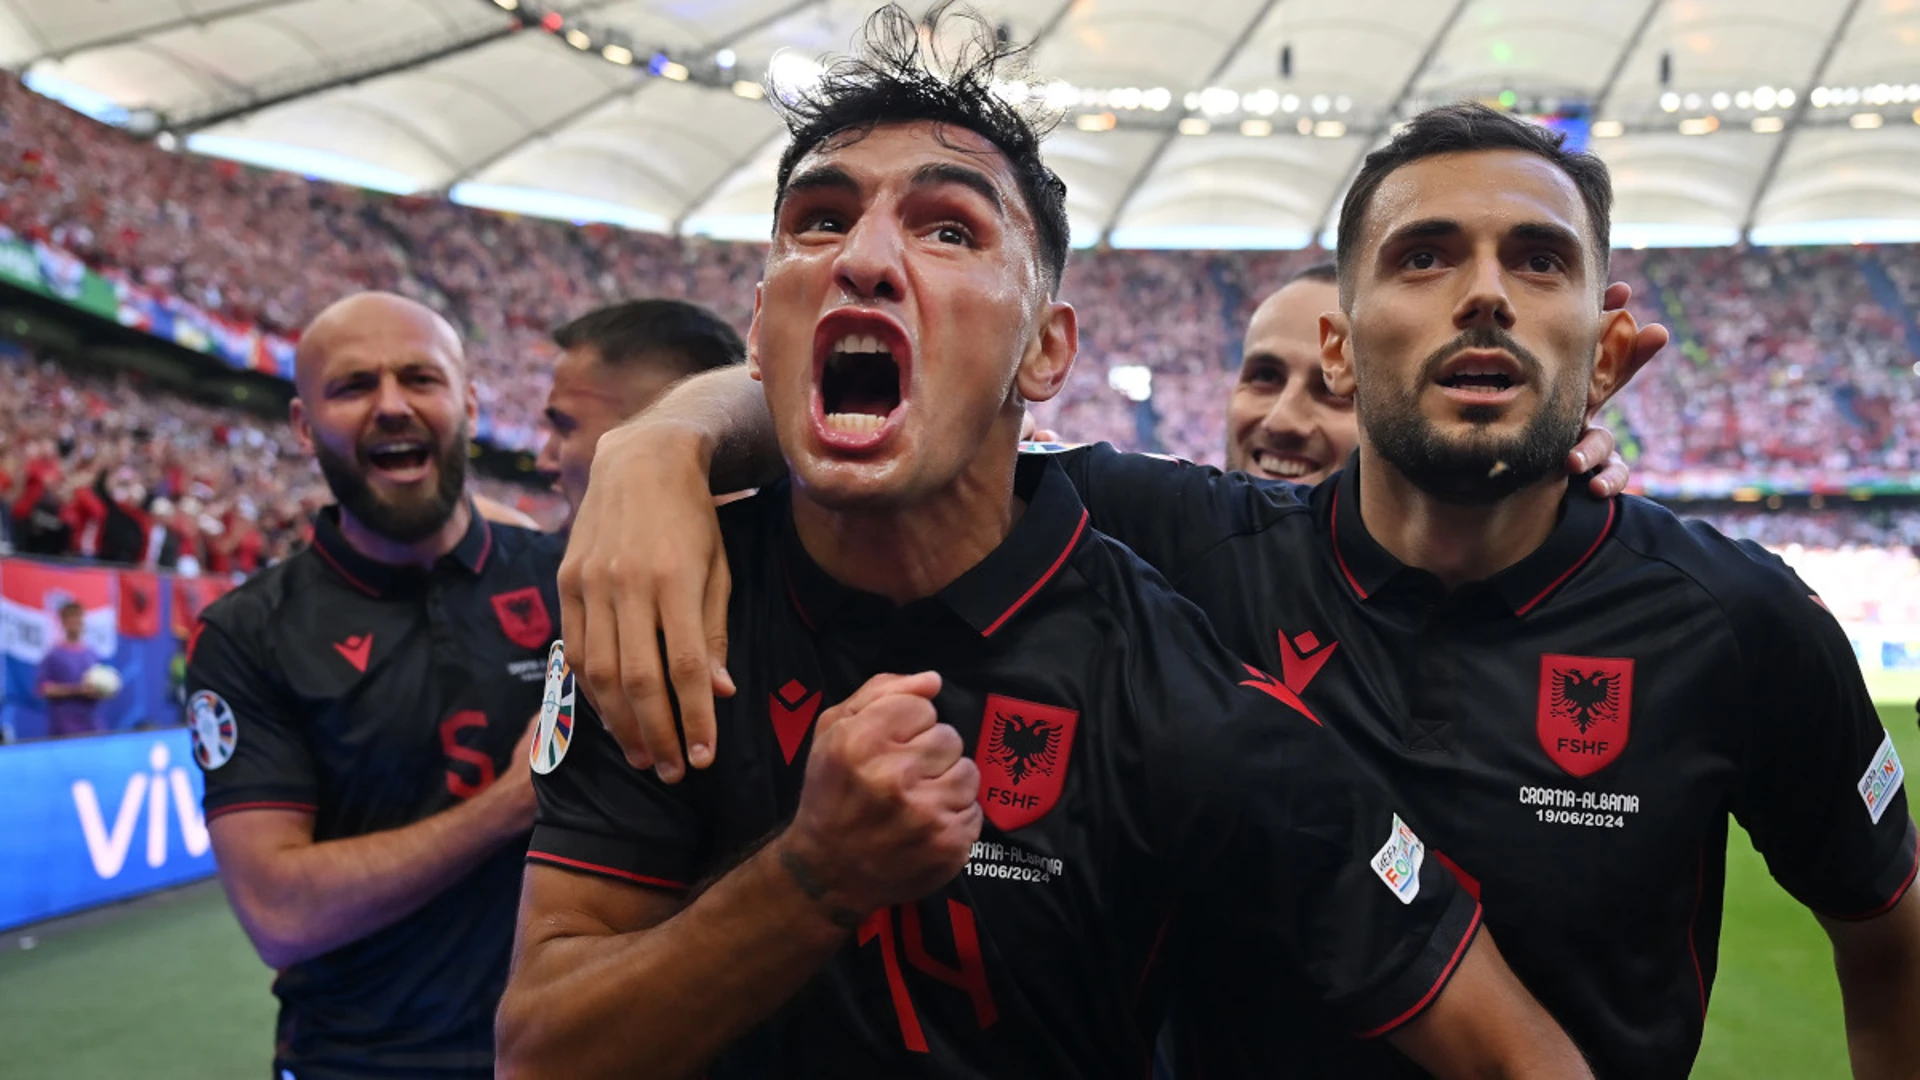 From fastest goal to fantastic fans, Albania sprang surprises at Euros